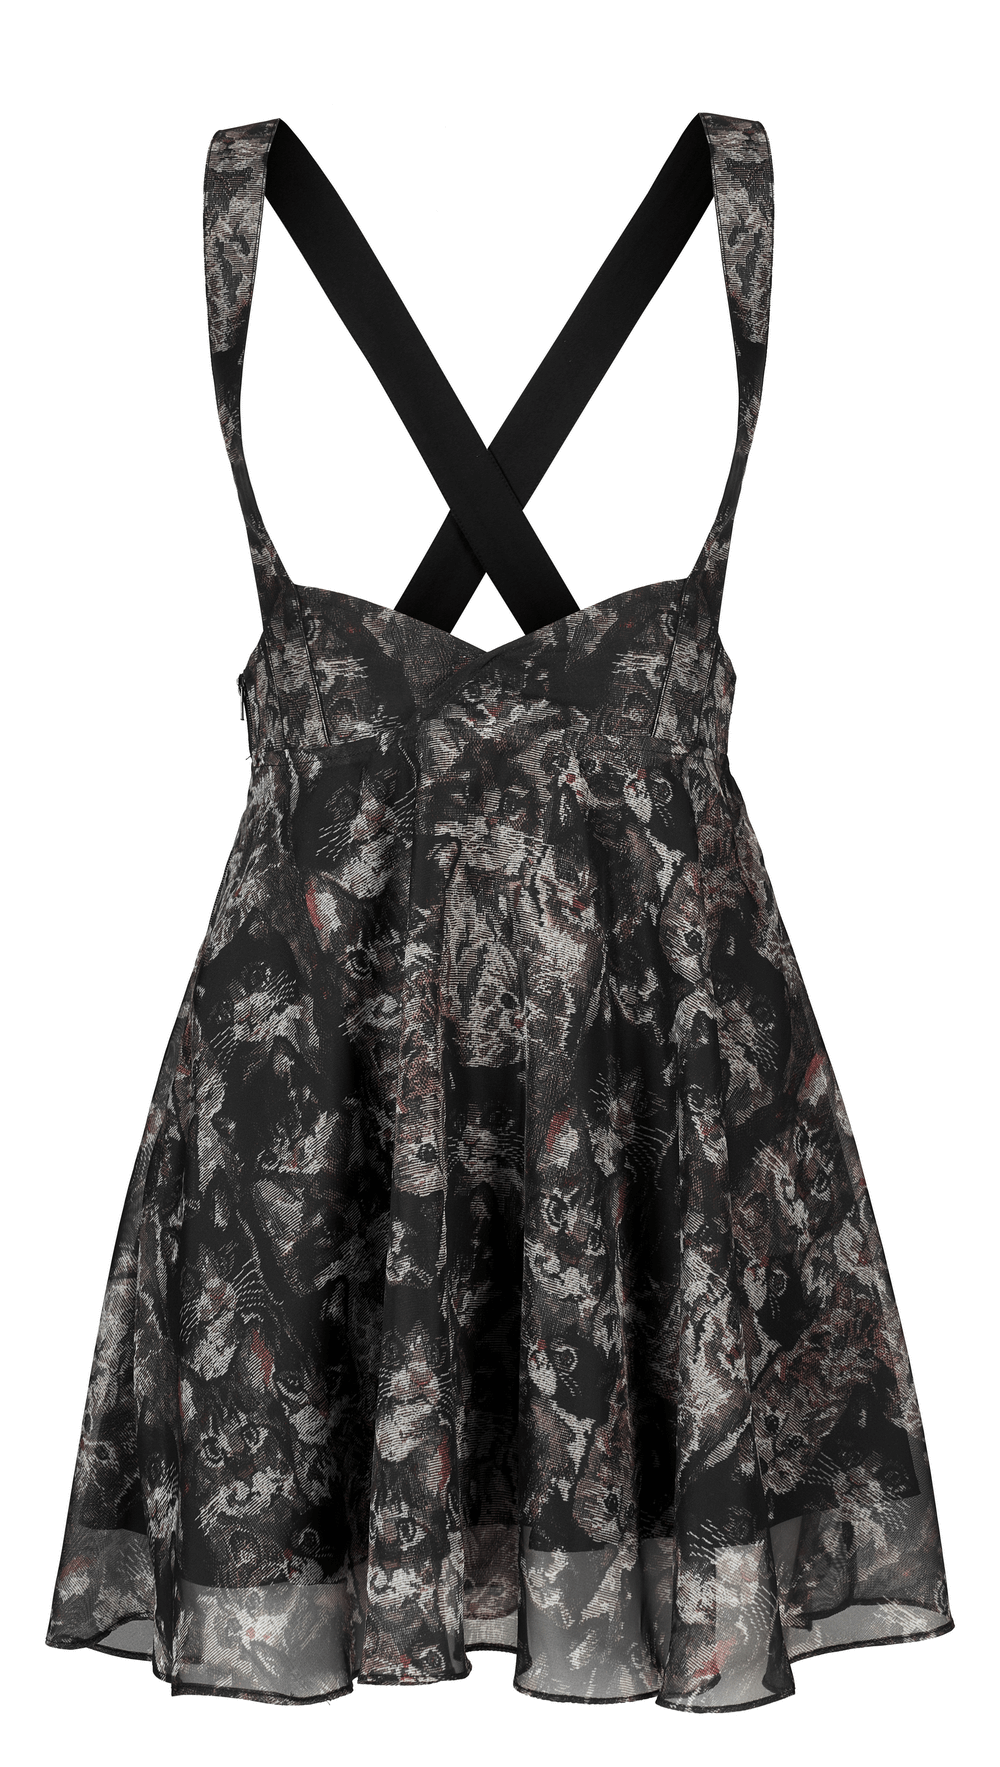 Floral Print Cross-Back A-line Skirt with Cat-Ear Detail